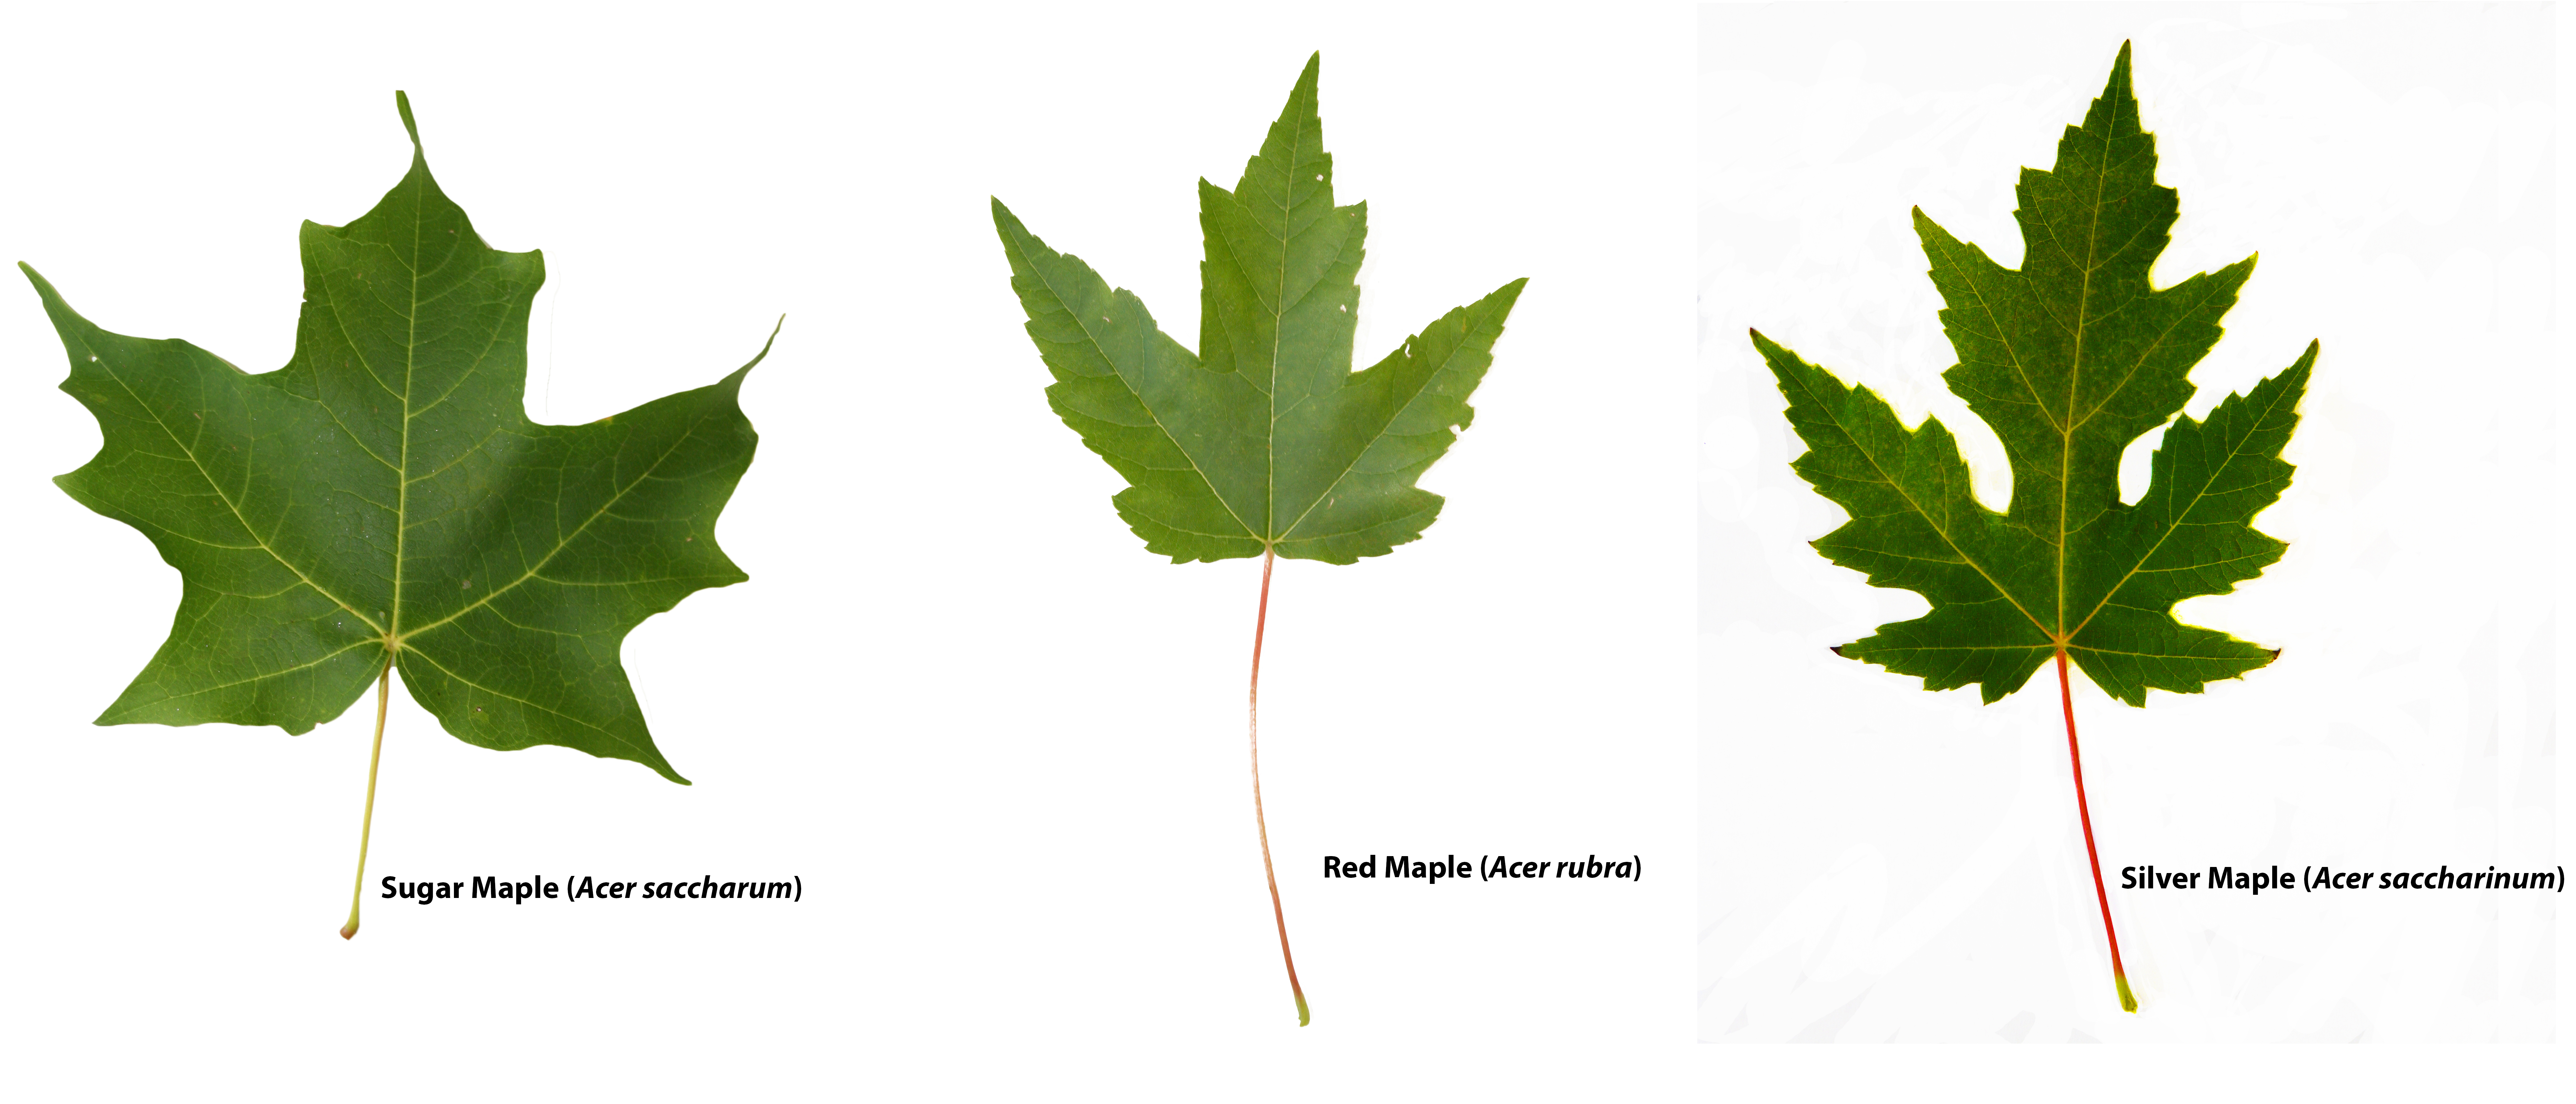 Comparison of different maple trees by leaves